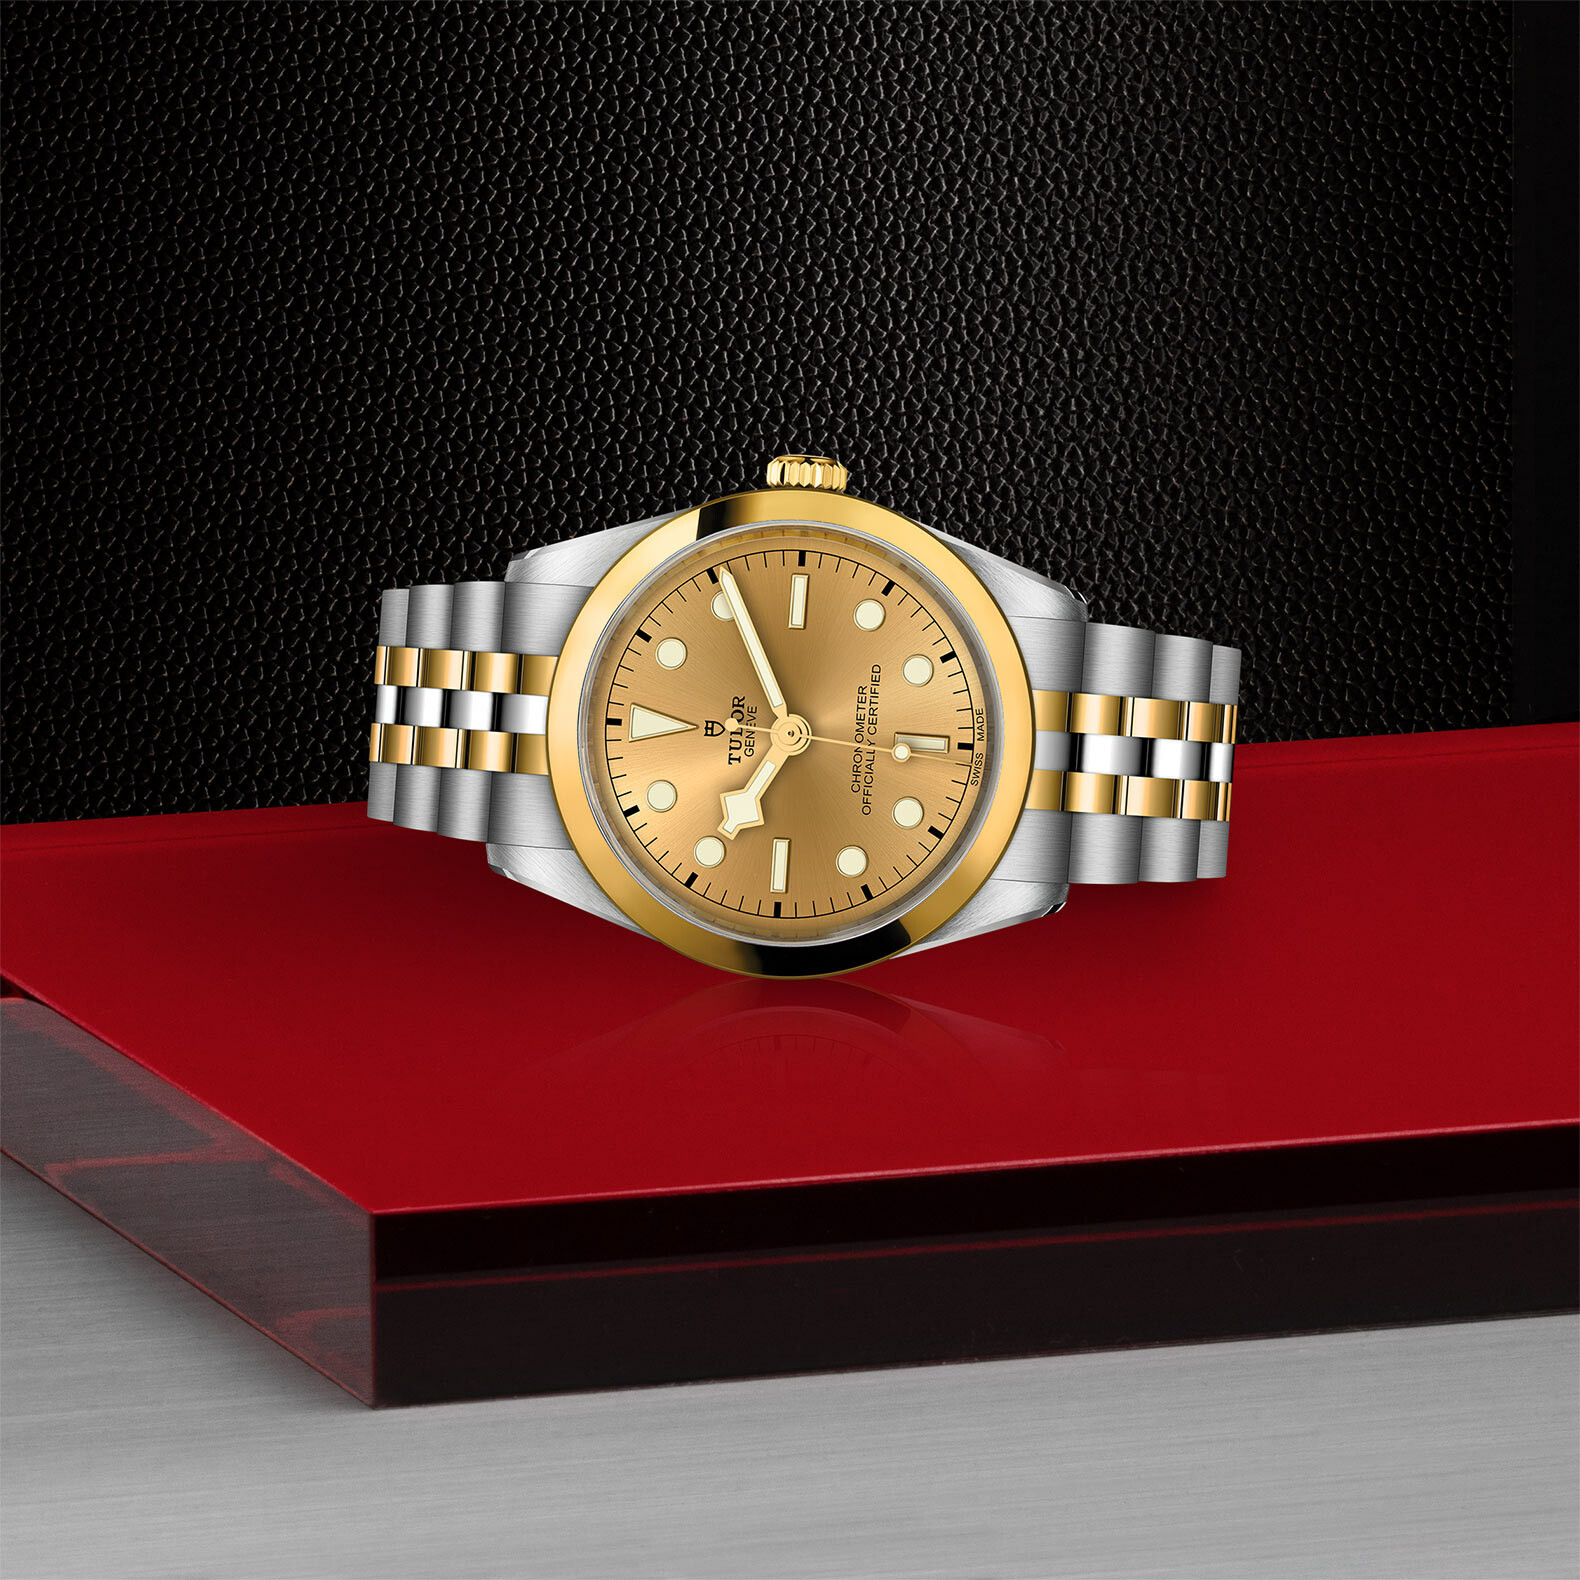 Purchase TUDOR Black Bay 36 SG watch, 36 mm steel case, Steel and yellow  gold bracelet